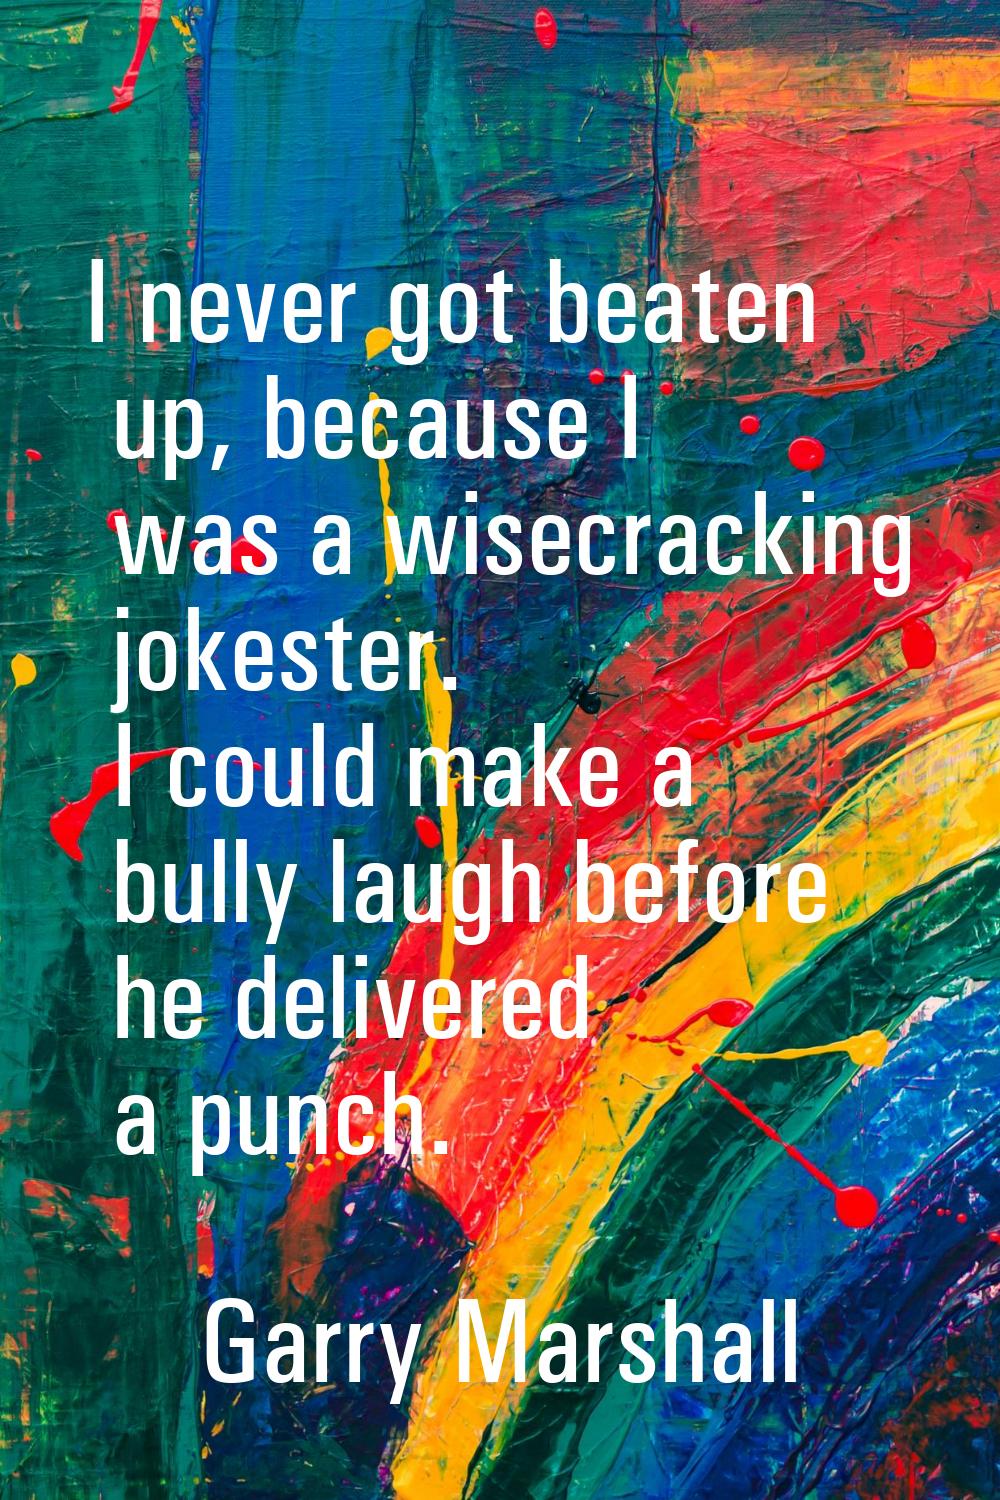 I never got beaten up, because I was a wisecracking jokester. I could make a bully laugh before he 